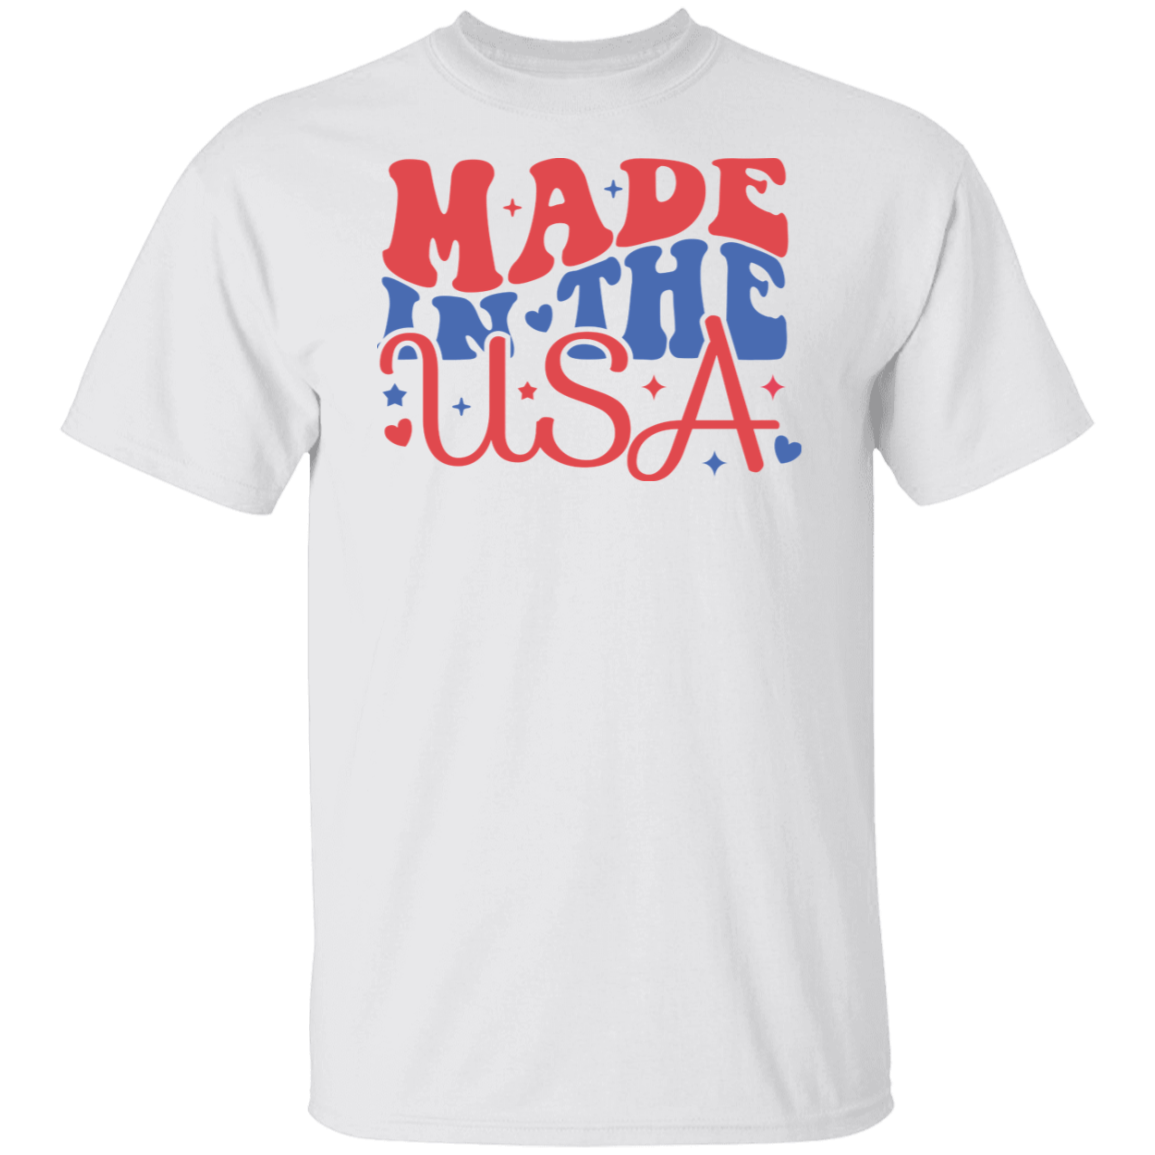 Made in The USA | short sleeve premium T-Shirt